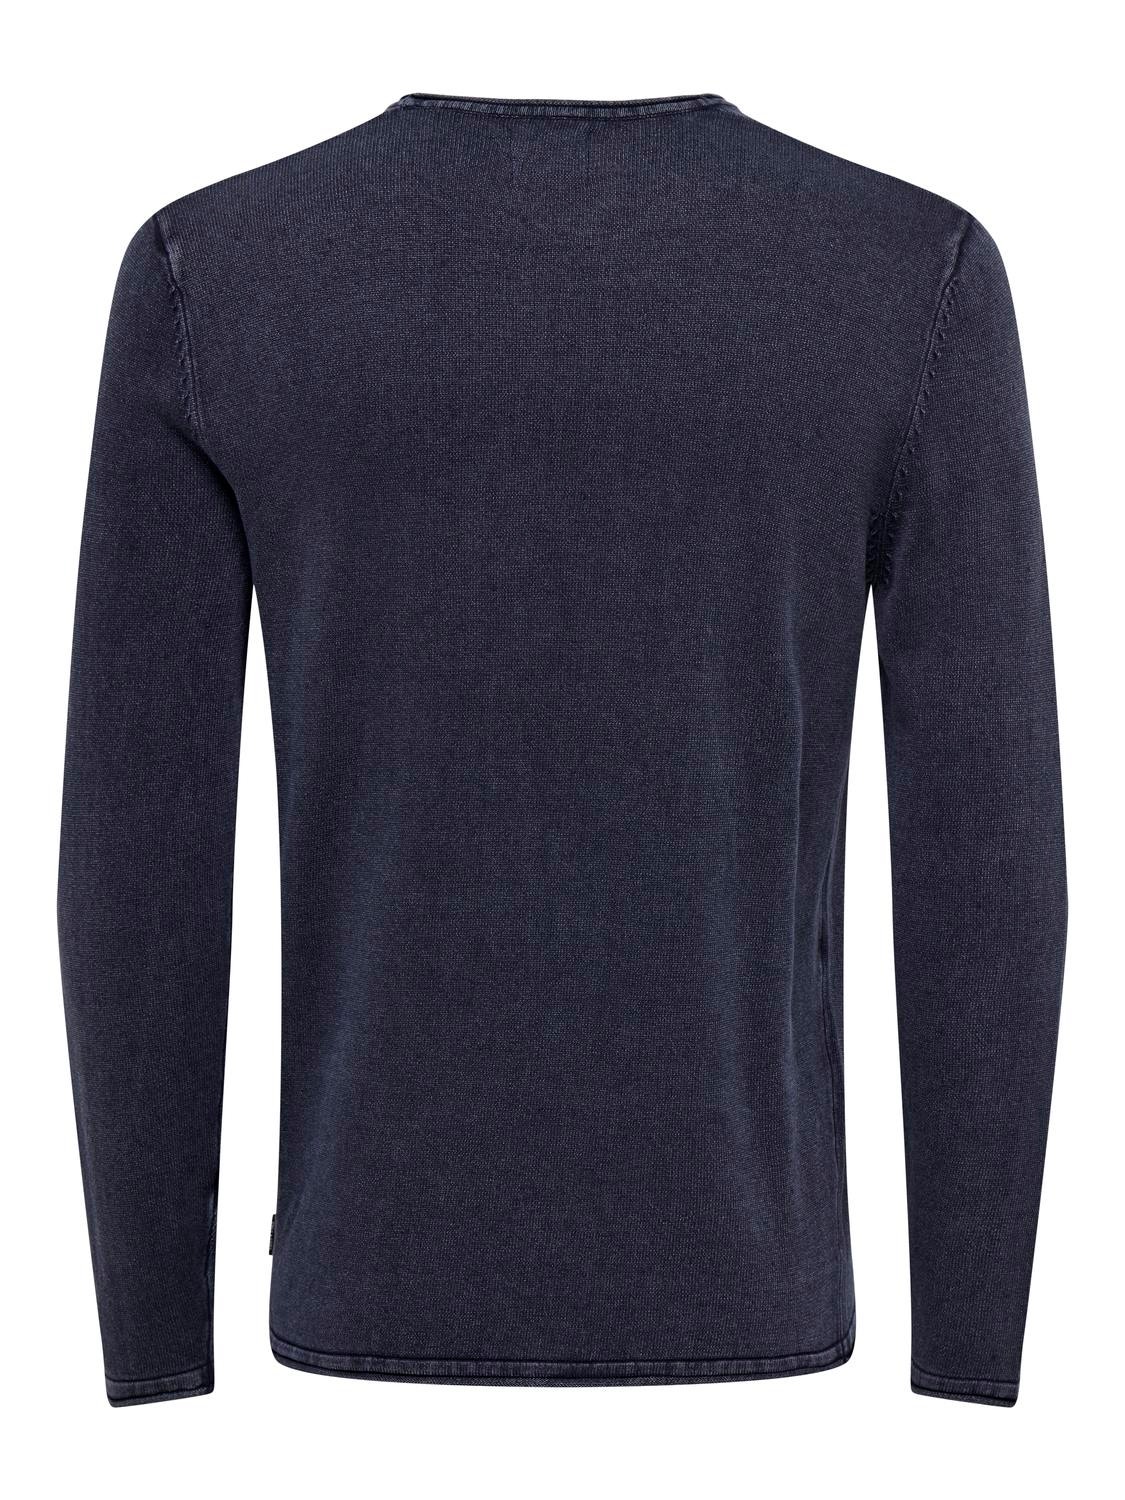 ONLY & SONS Regular Fit Crew neck Pullover -Dress Blues - 22006806